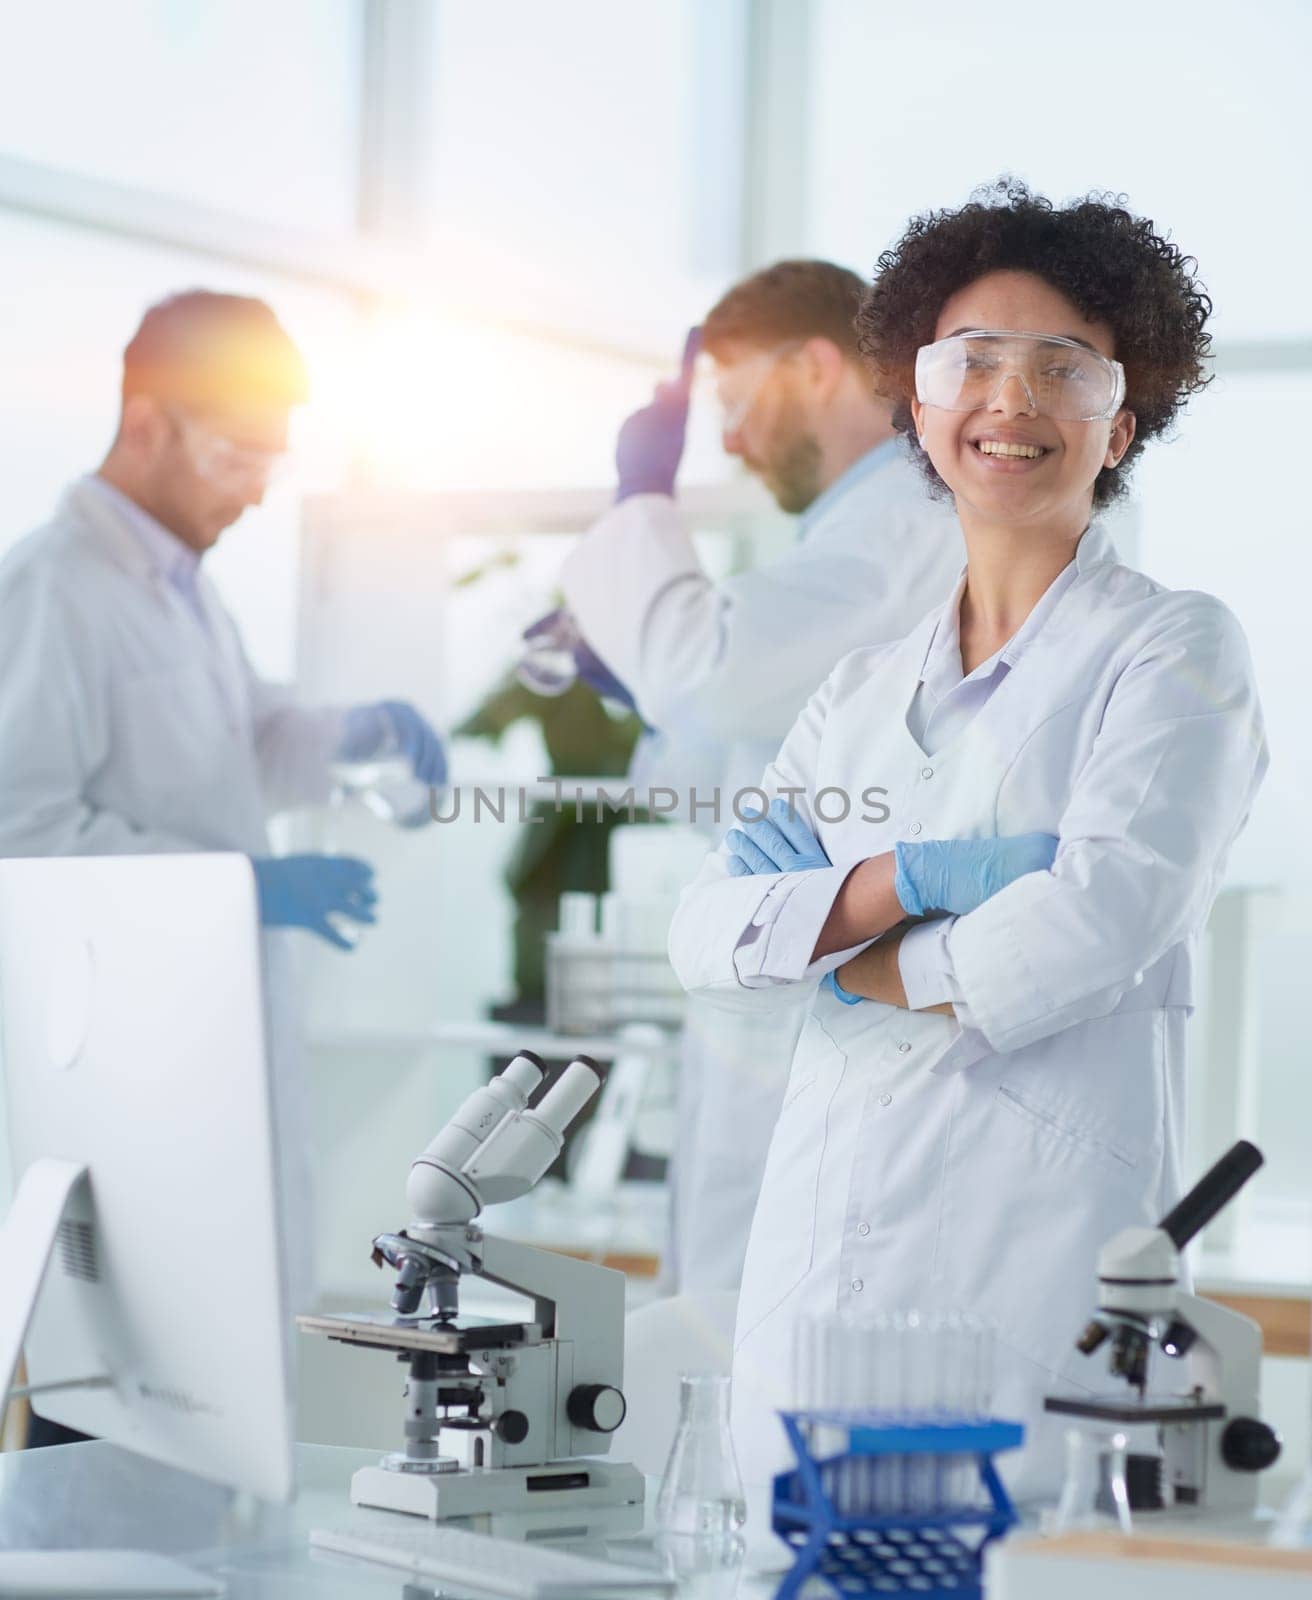 Smiling scientists looking at camera arms crossed in laboratory by asdf